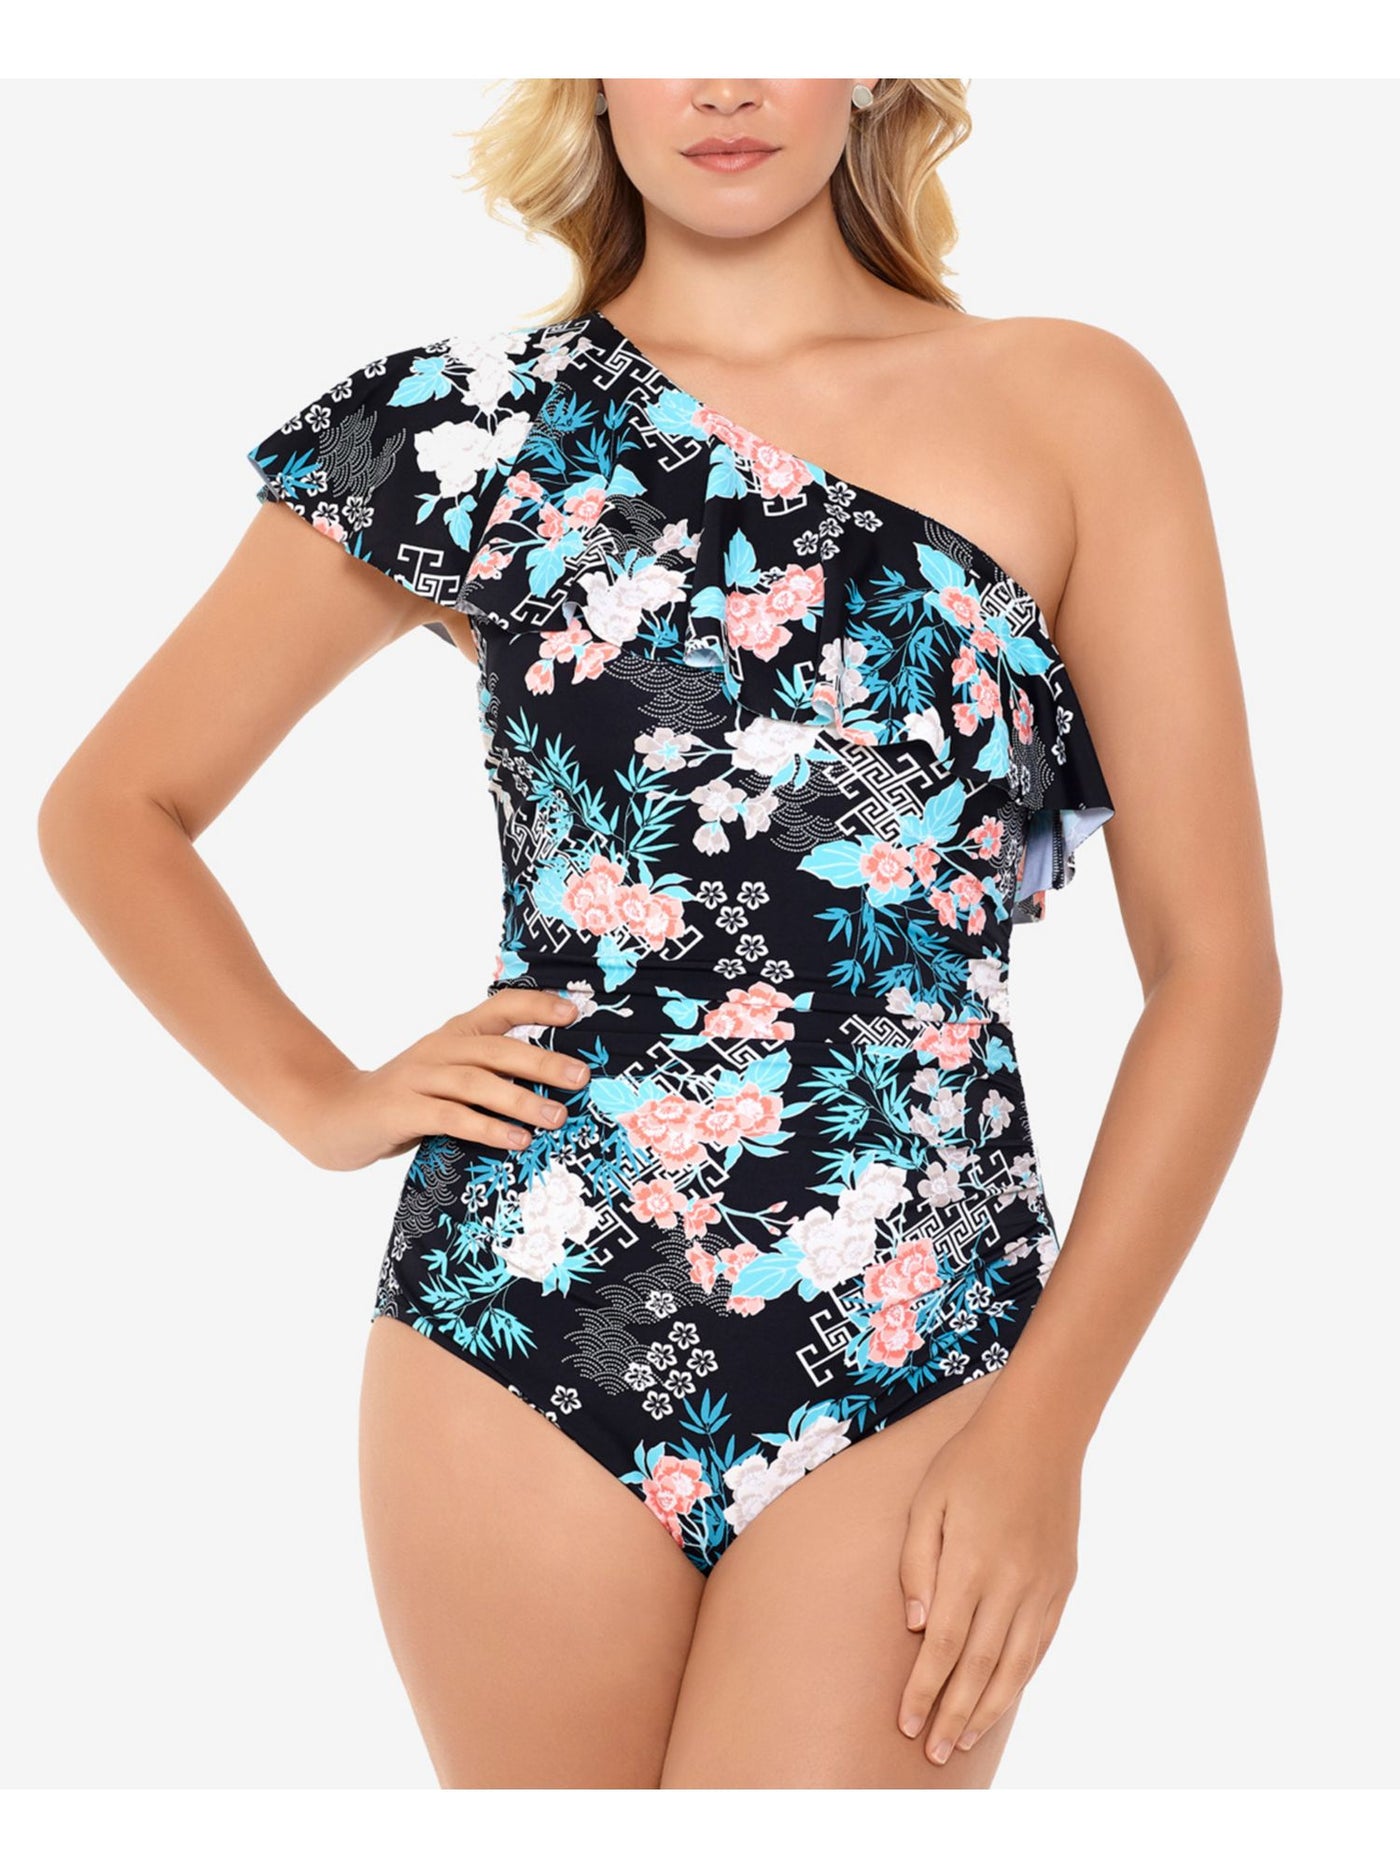 SWIM SOLUTIONS Women's Black Tropical Print Stretch Allover Slimming Fixed Cups Full Coverage Ruffled One Shoulder One Piece Swimsuit 12